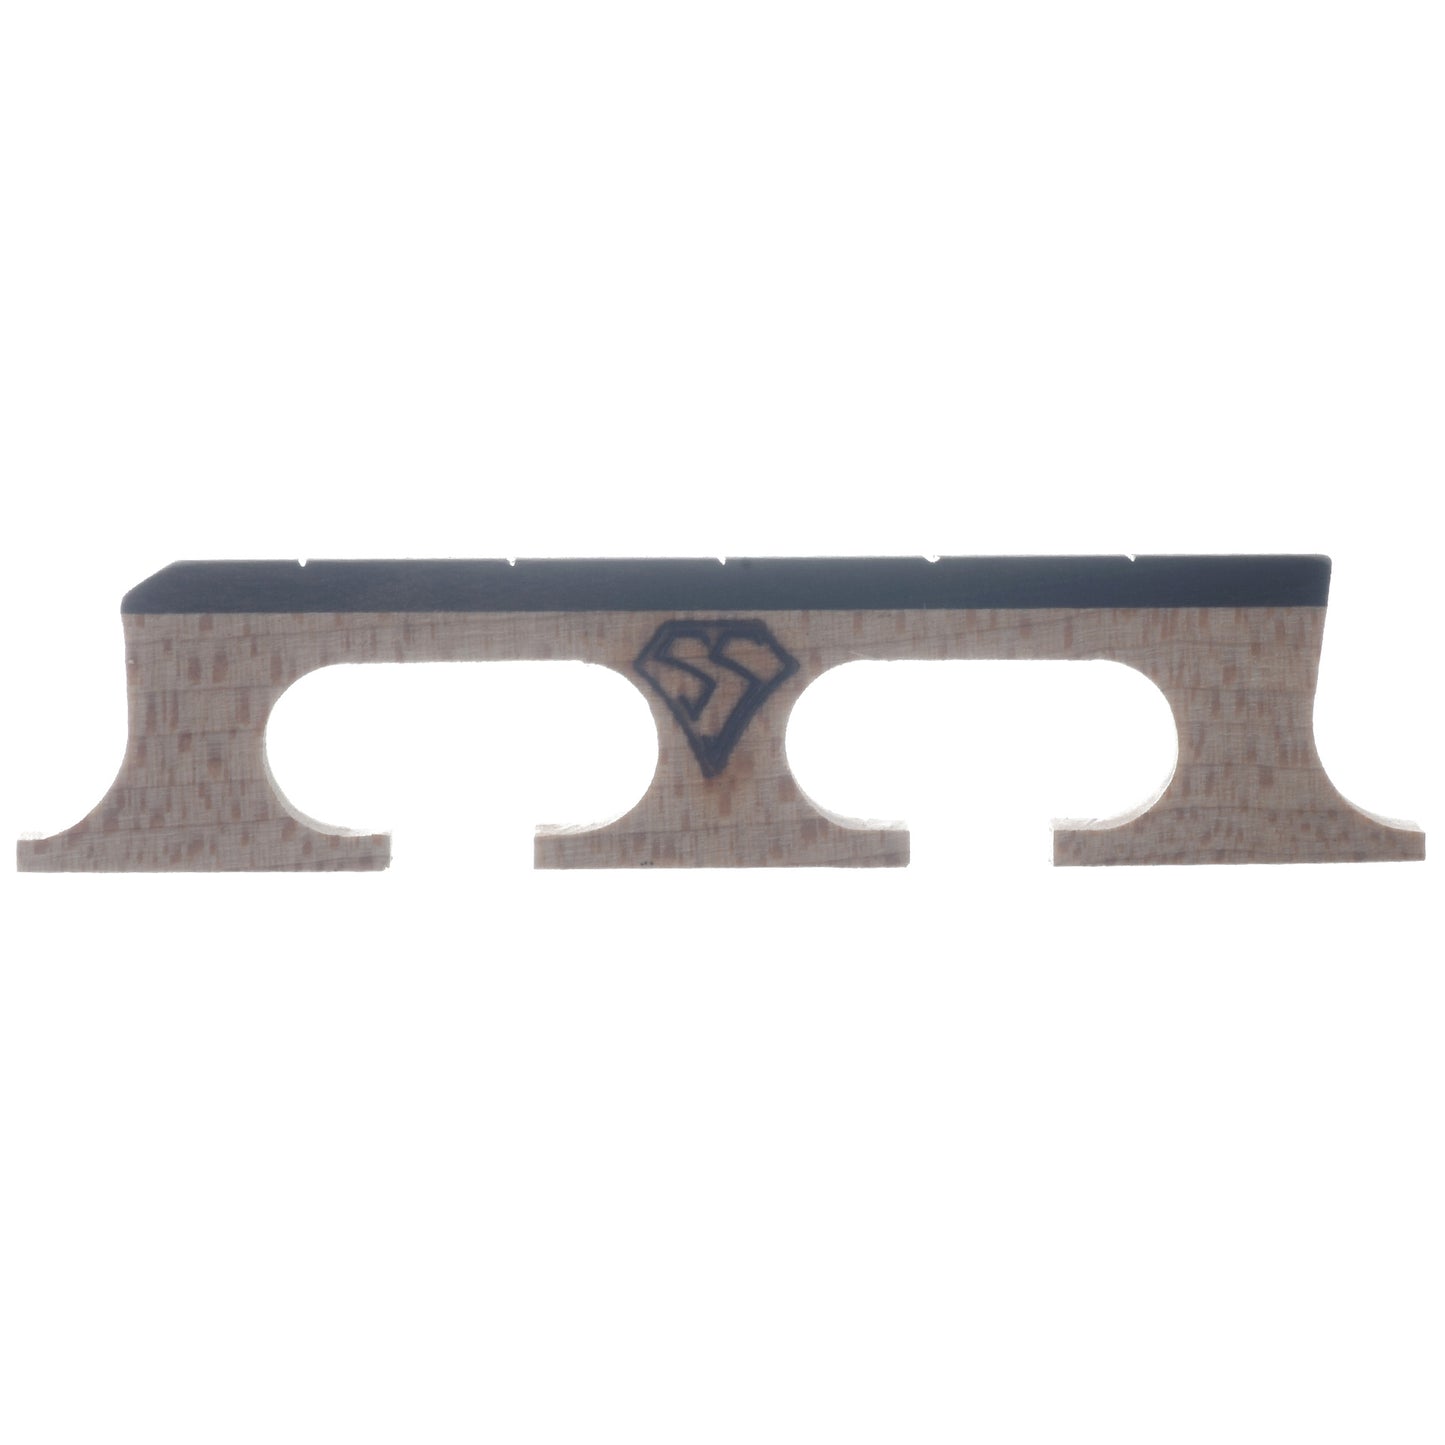 Image 2 of Snuffy Smith New Generation Banjo Bridge, .656" High with Crowe Spacing - SKU# SSNG-656-C : Product Type Accessories & Parts : Elderly Instruments